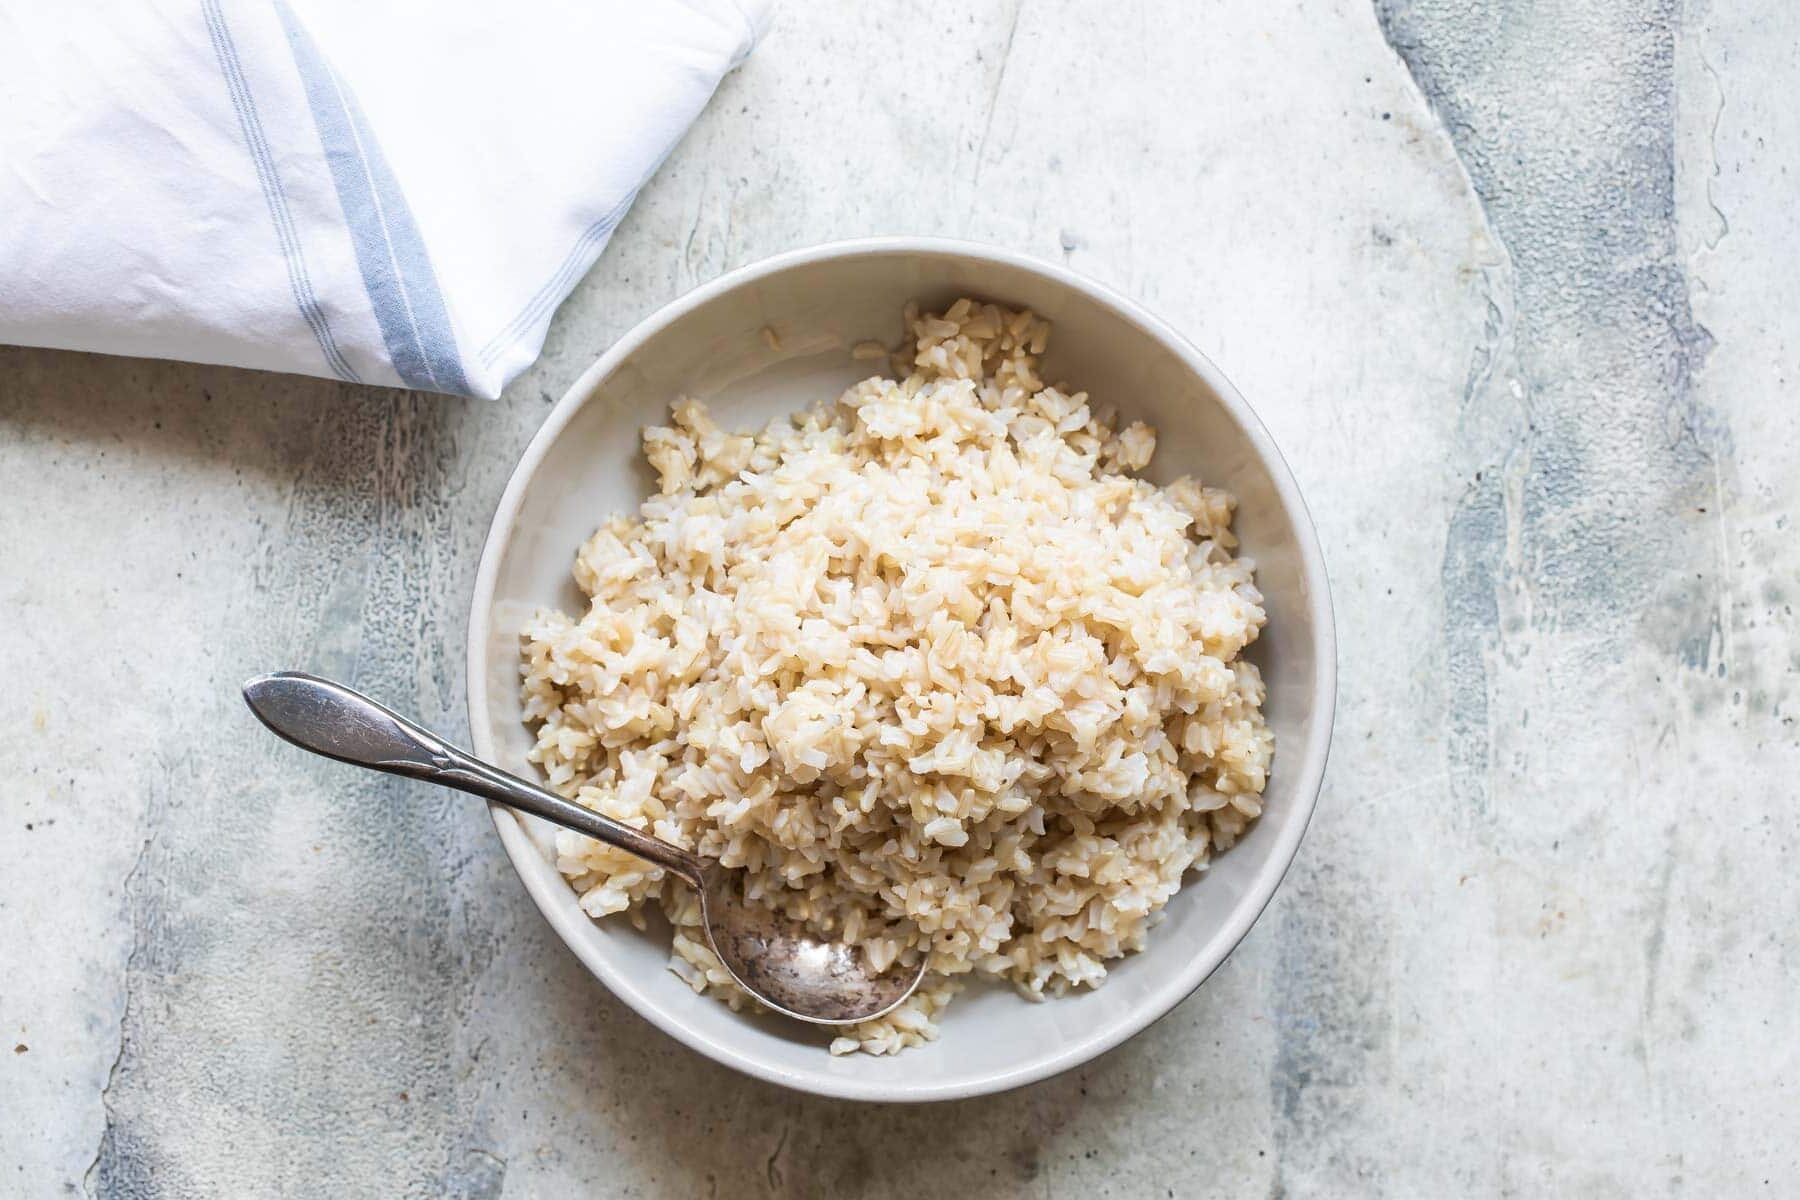 A bowl of brown rice with a silver spoon resting in it.